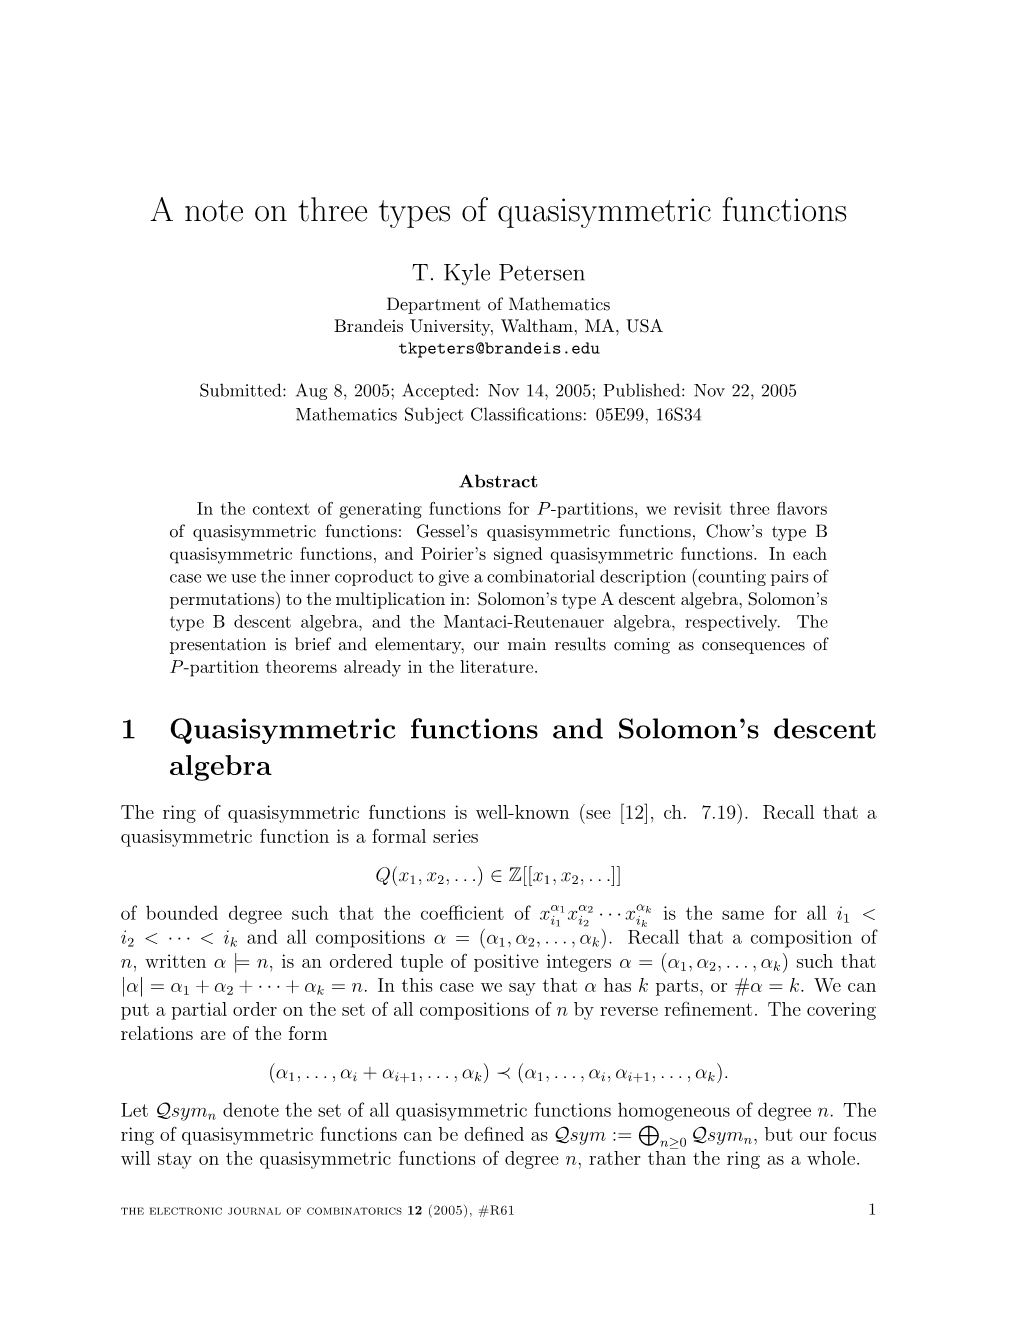 A Note on Three Types of Quasisymmetric Functions